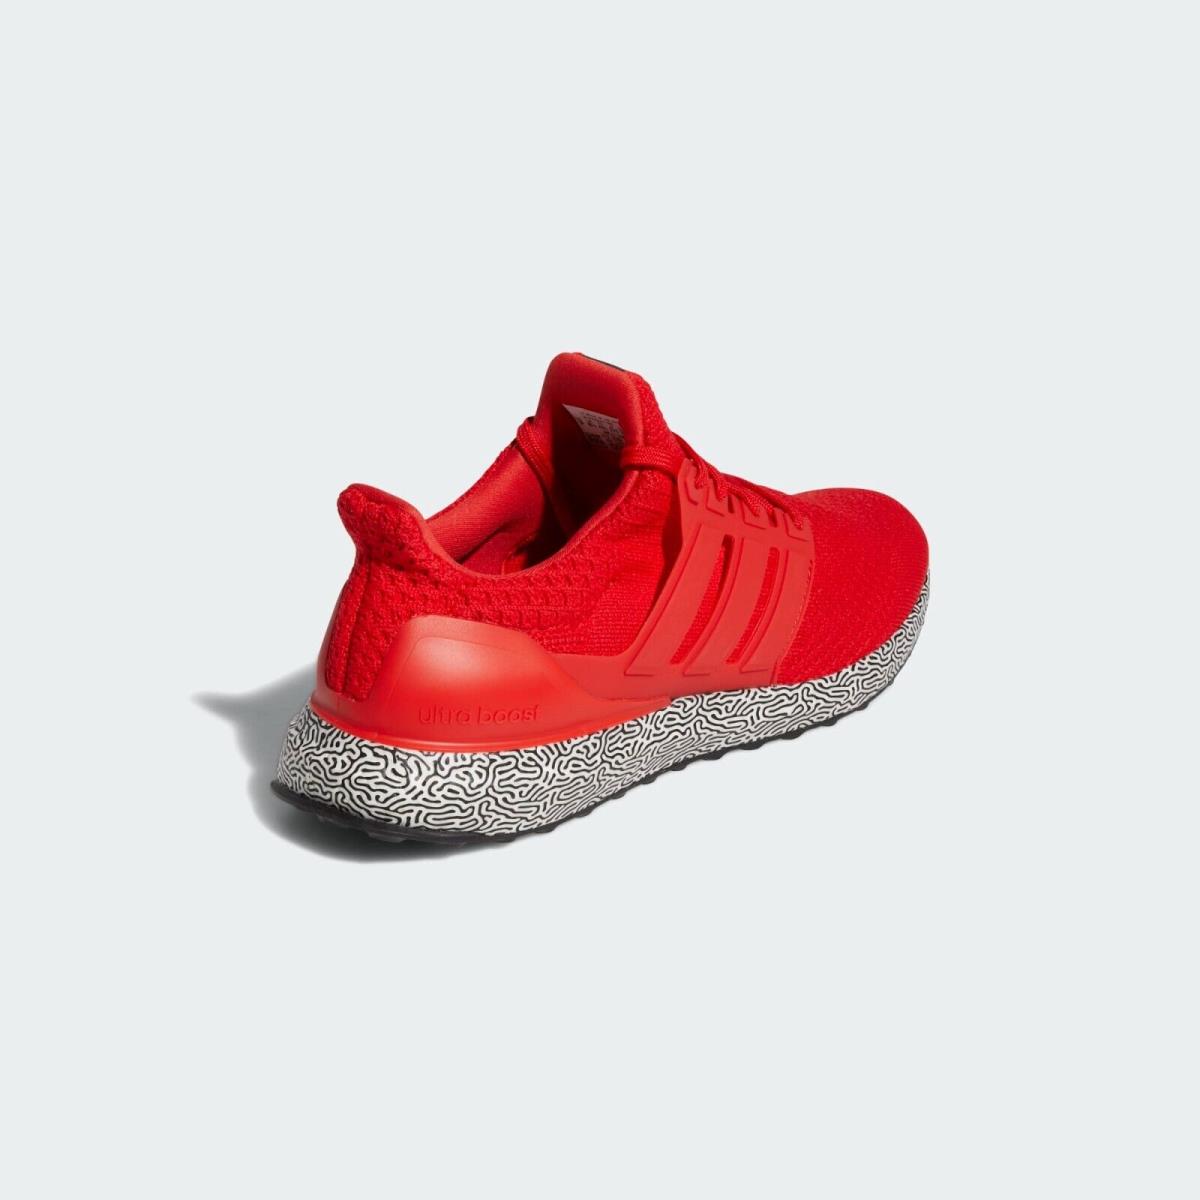 Adidas shoes UltraBoost DNA - Red 0